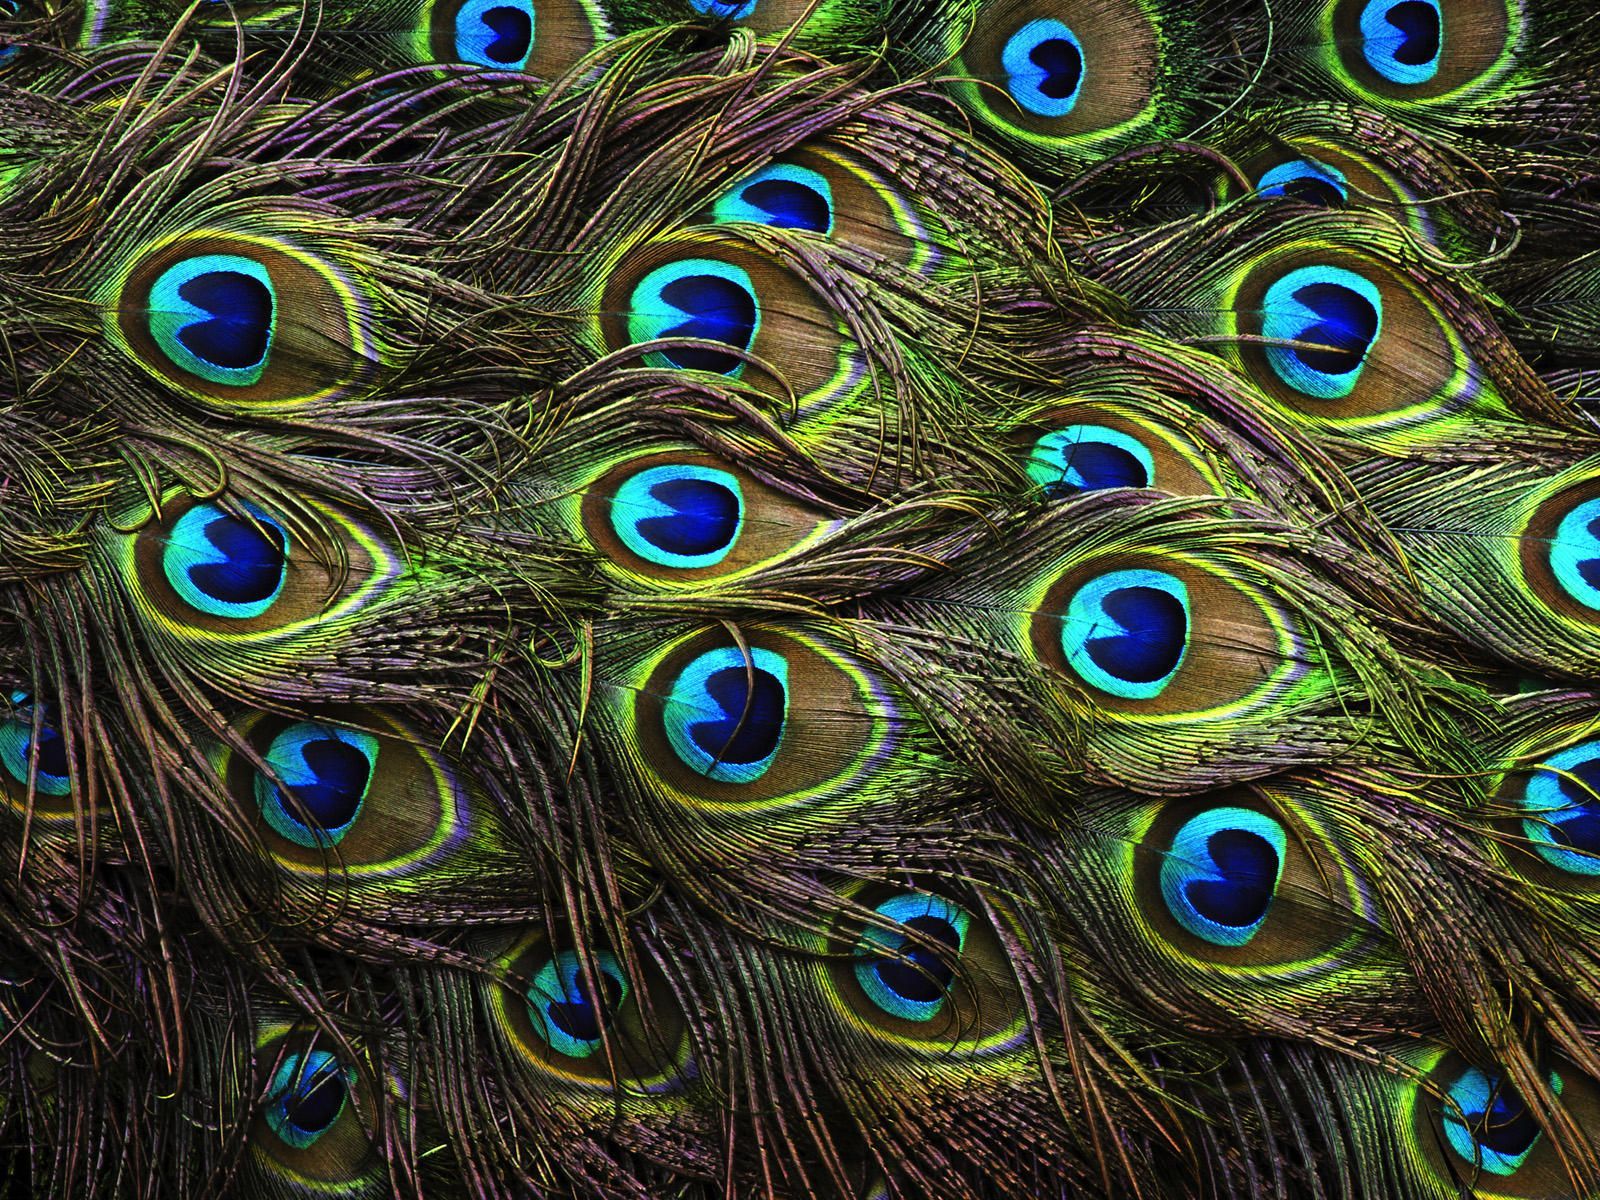 peacock-feathers-background-hd-wallpapers.jpg